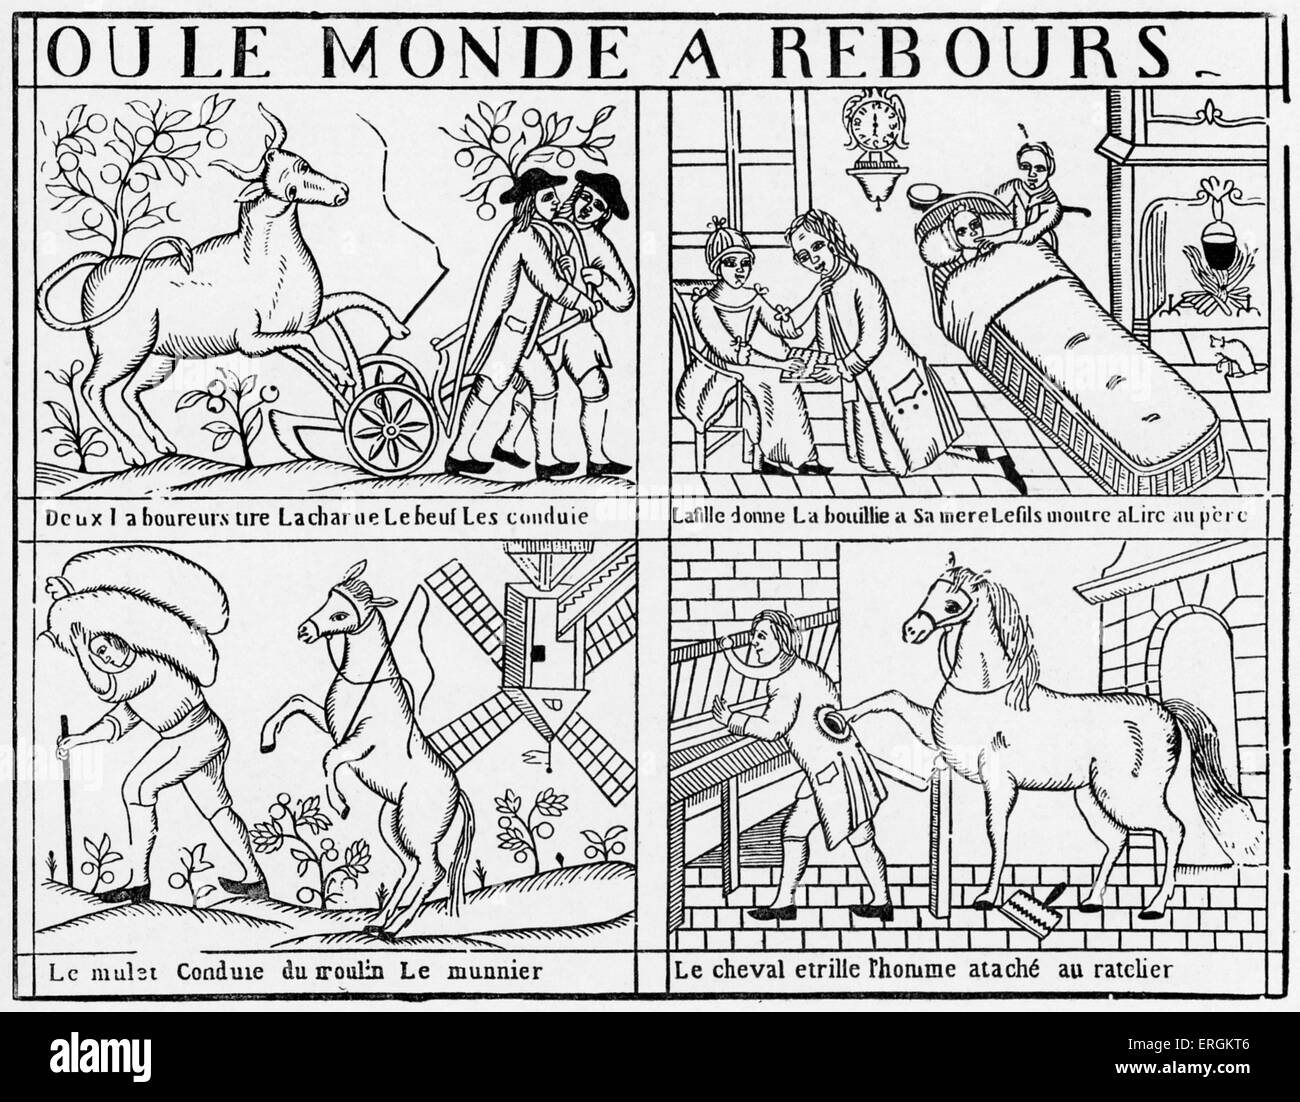 'Le monde renversé' ('Topsy-Turvy World') - engraving from beginning of 19th century. Published by Leloup, Le  Mans. Tradition Stock Photo